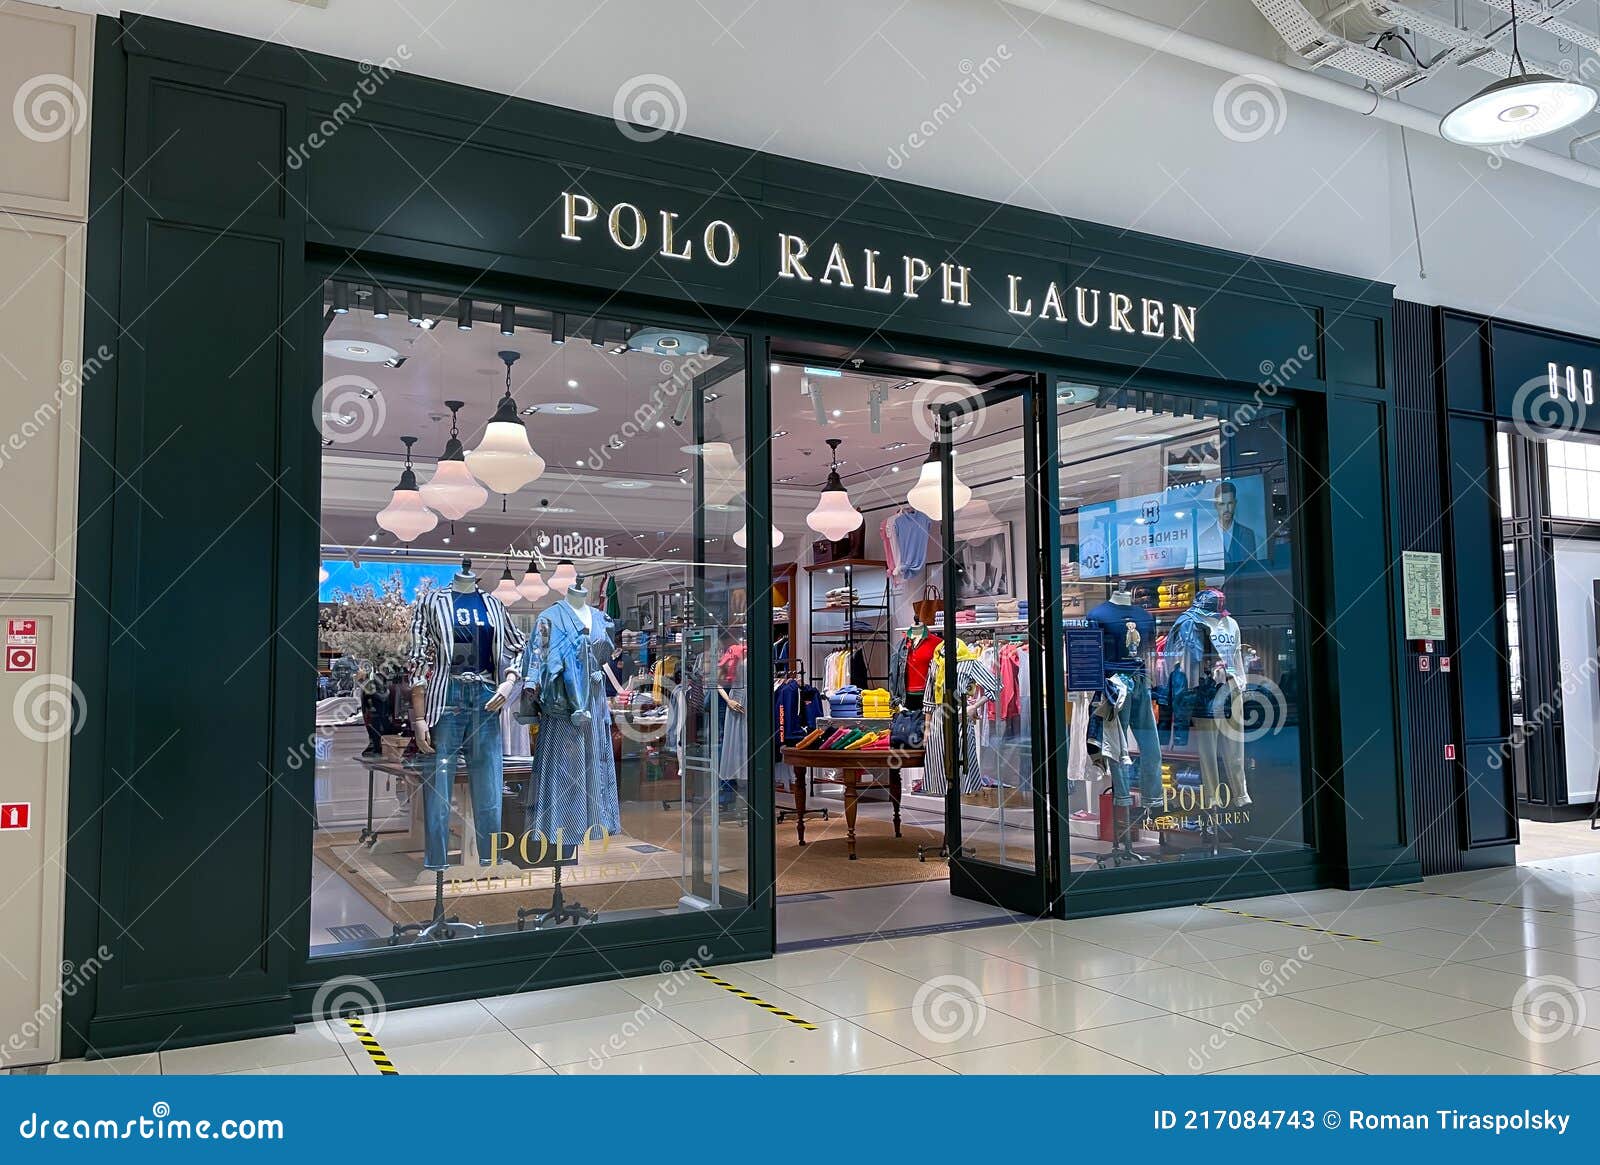 Polo Ralph Lauren store editorial stock photo. Image of entrance - 217084743